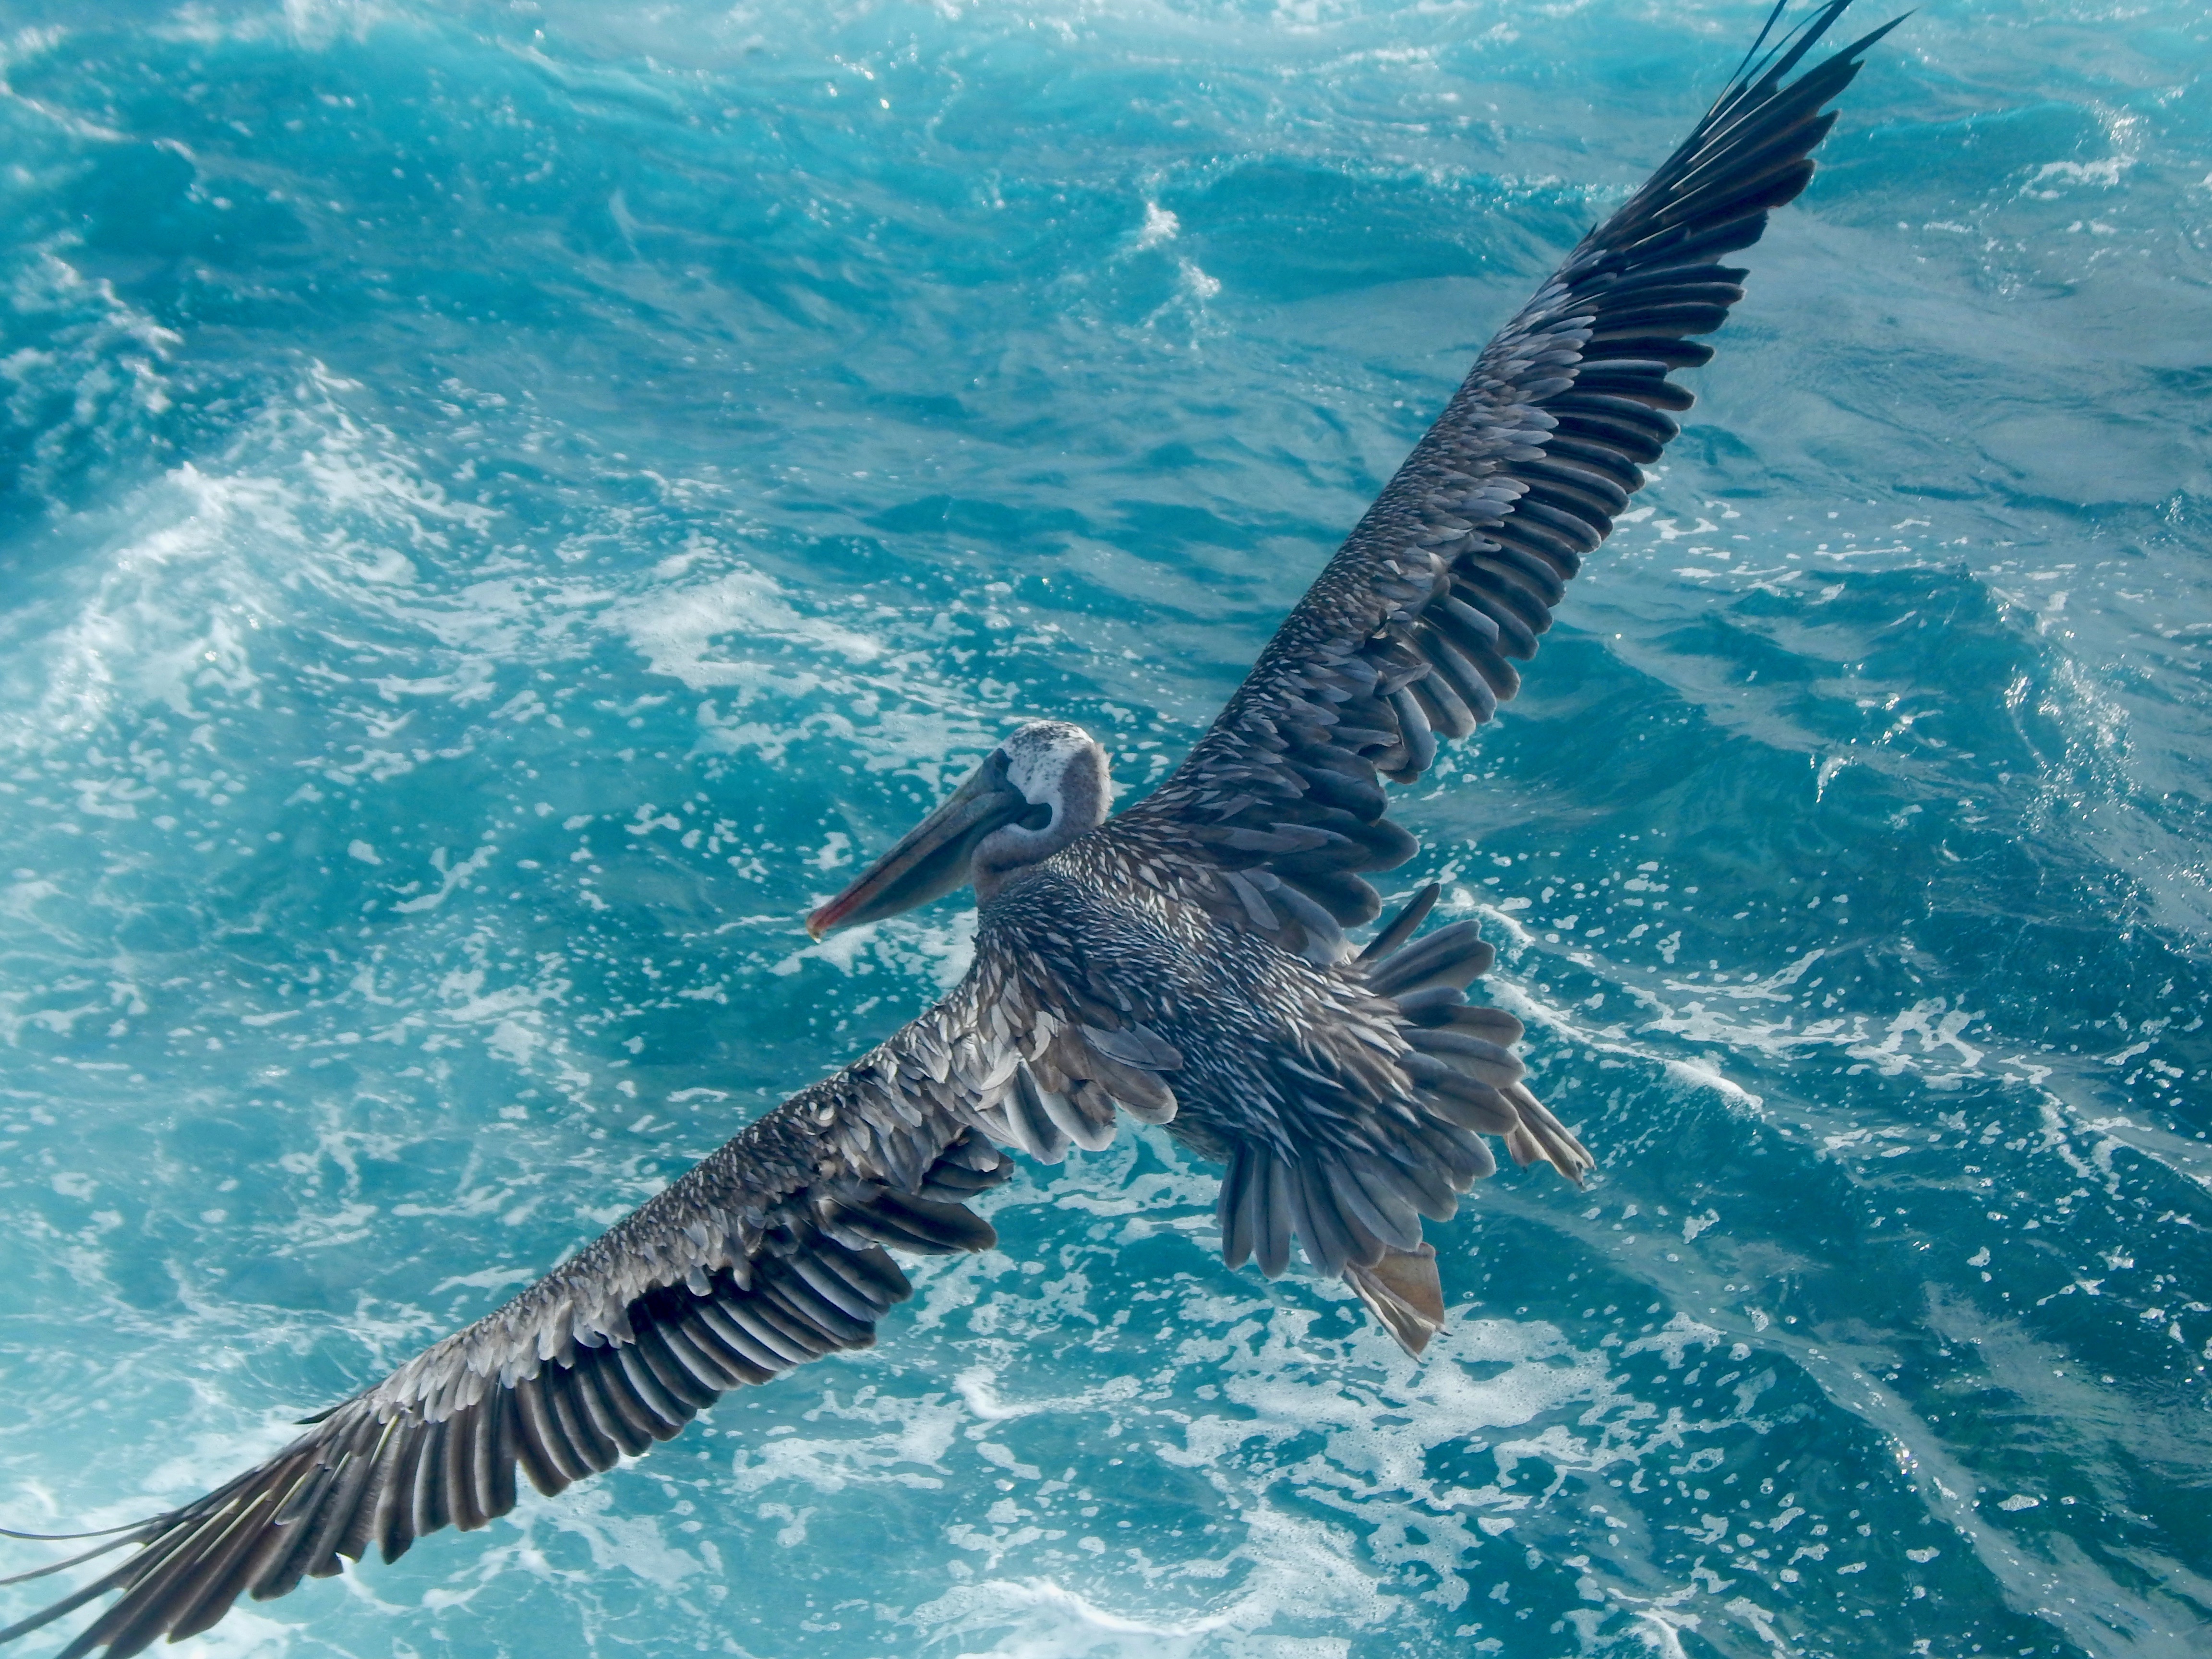 A Galapagos Brown Pelican (Pelecanus occidentalis ssp urinator) soars over the foamy waters of the Pacific Ocean.